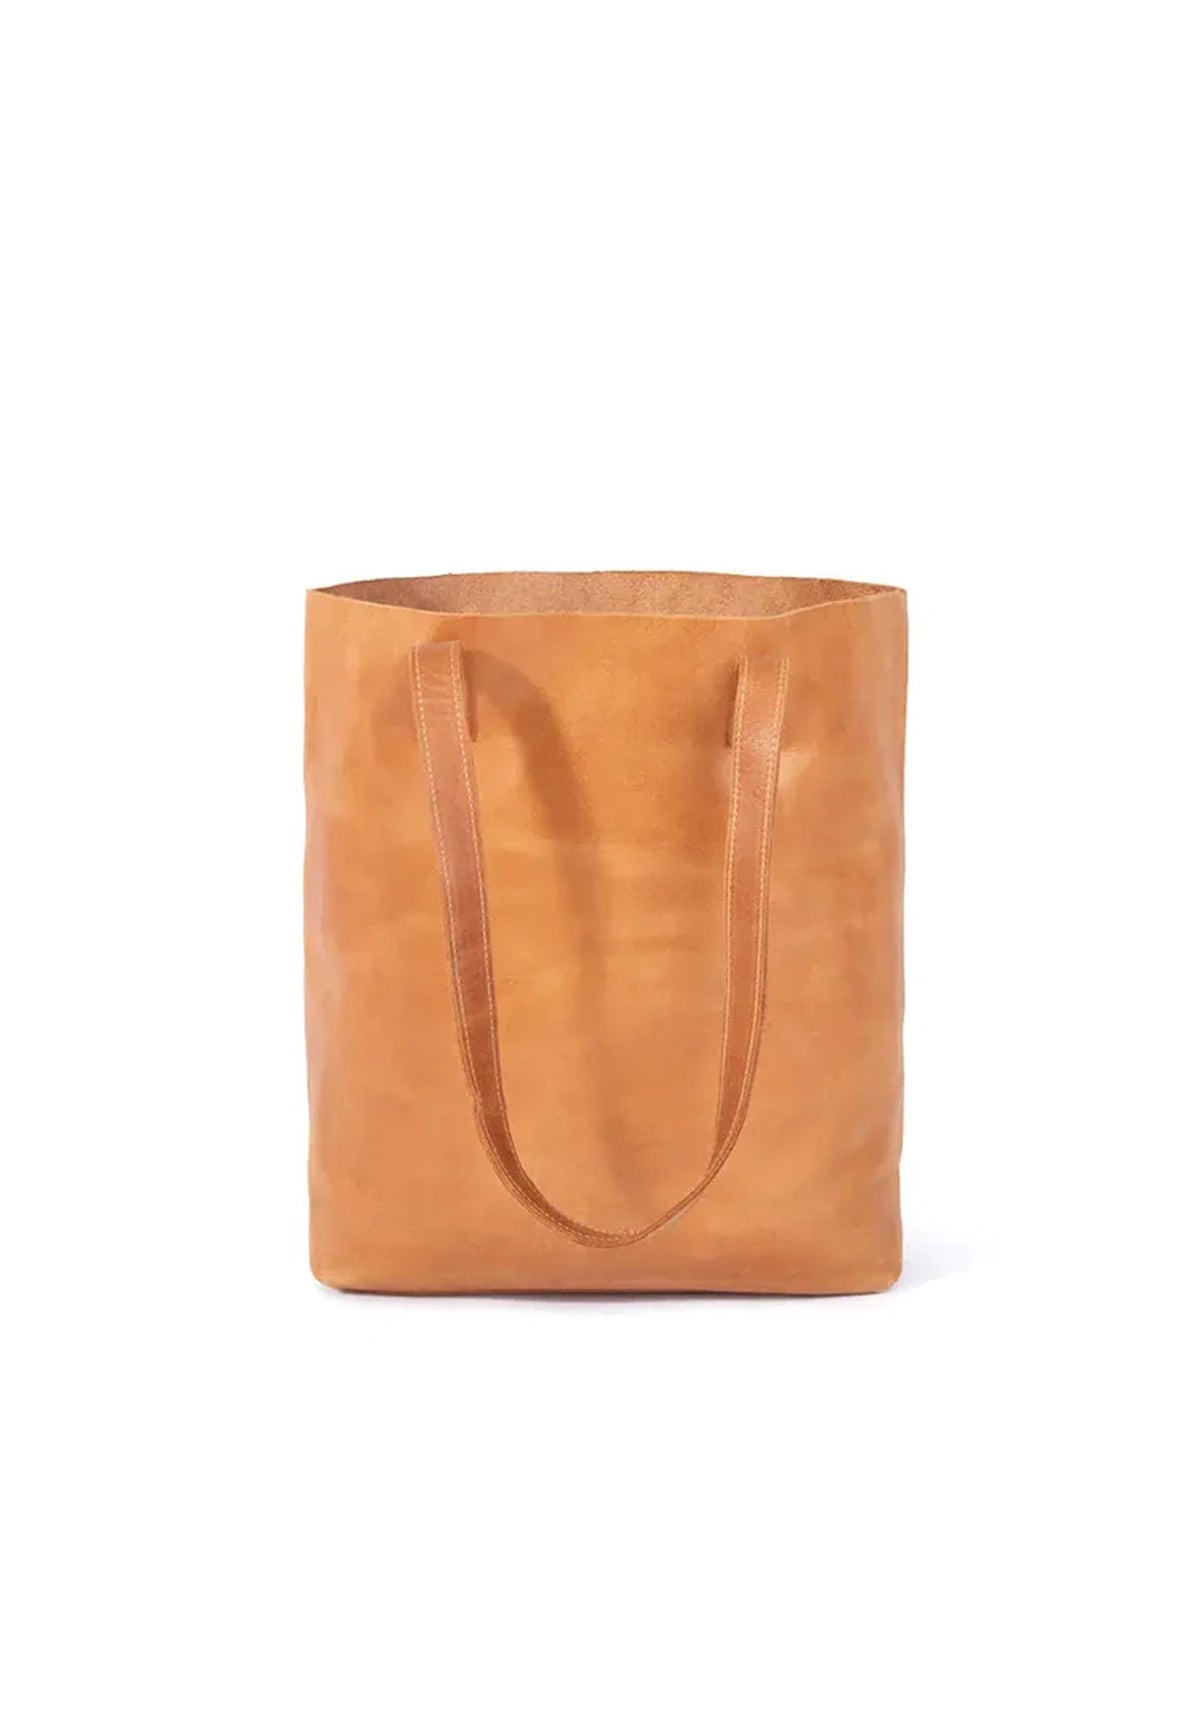 LEATHER TOTE BAG CAMEL